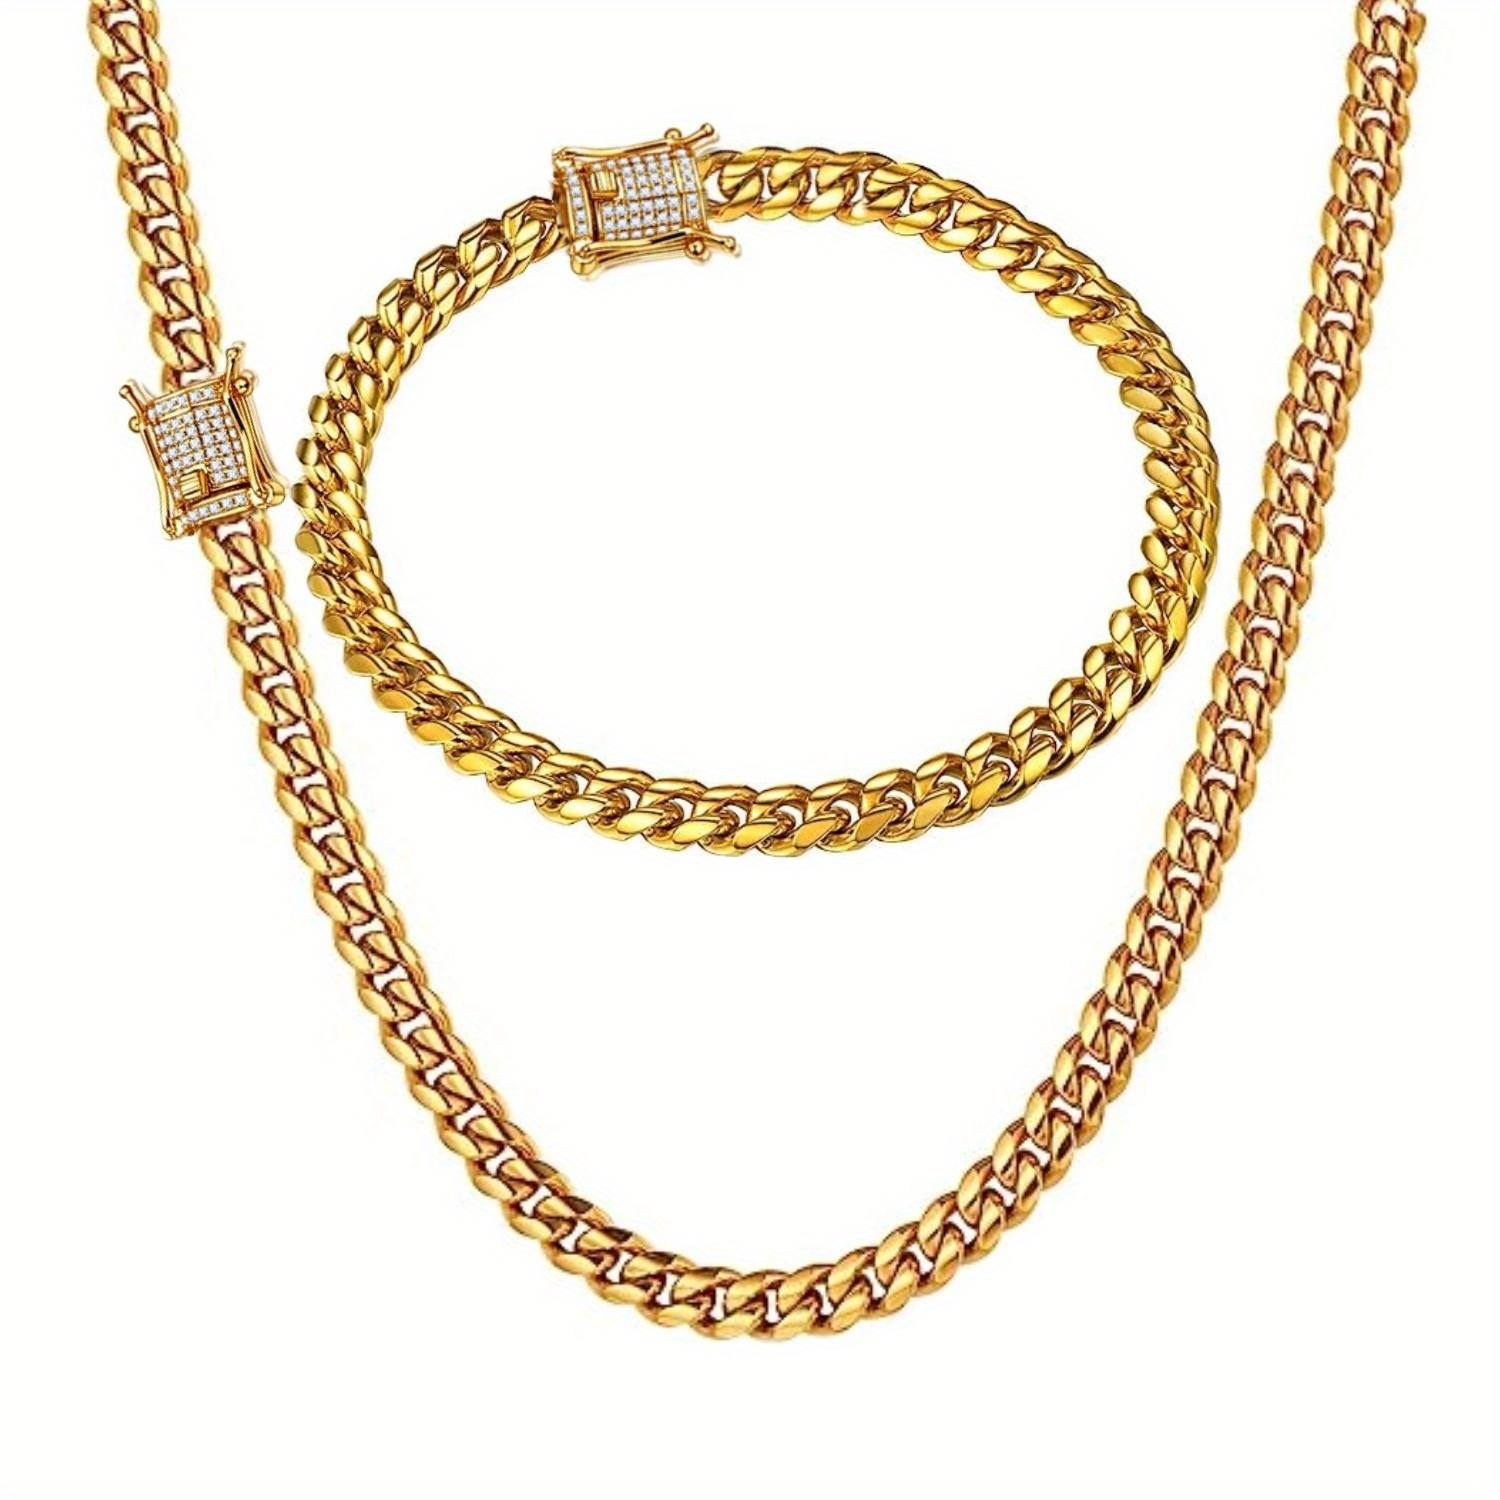 

1pc Glitz & Glam Miami Cuban Link Chain Set - Durable 18k Gold Plated Stainless Steel 6mm Bracelet & Necklace